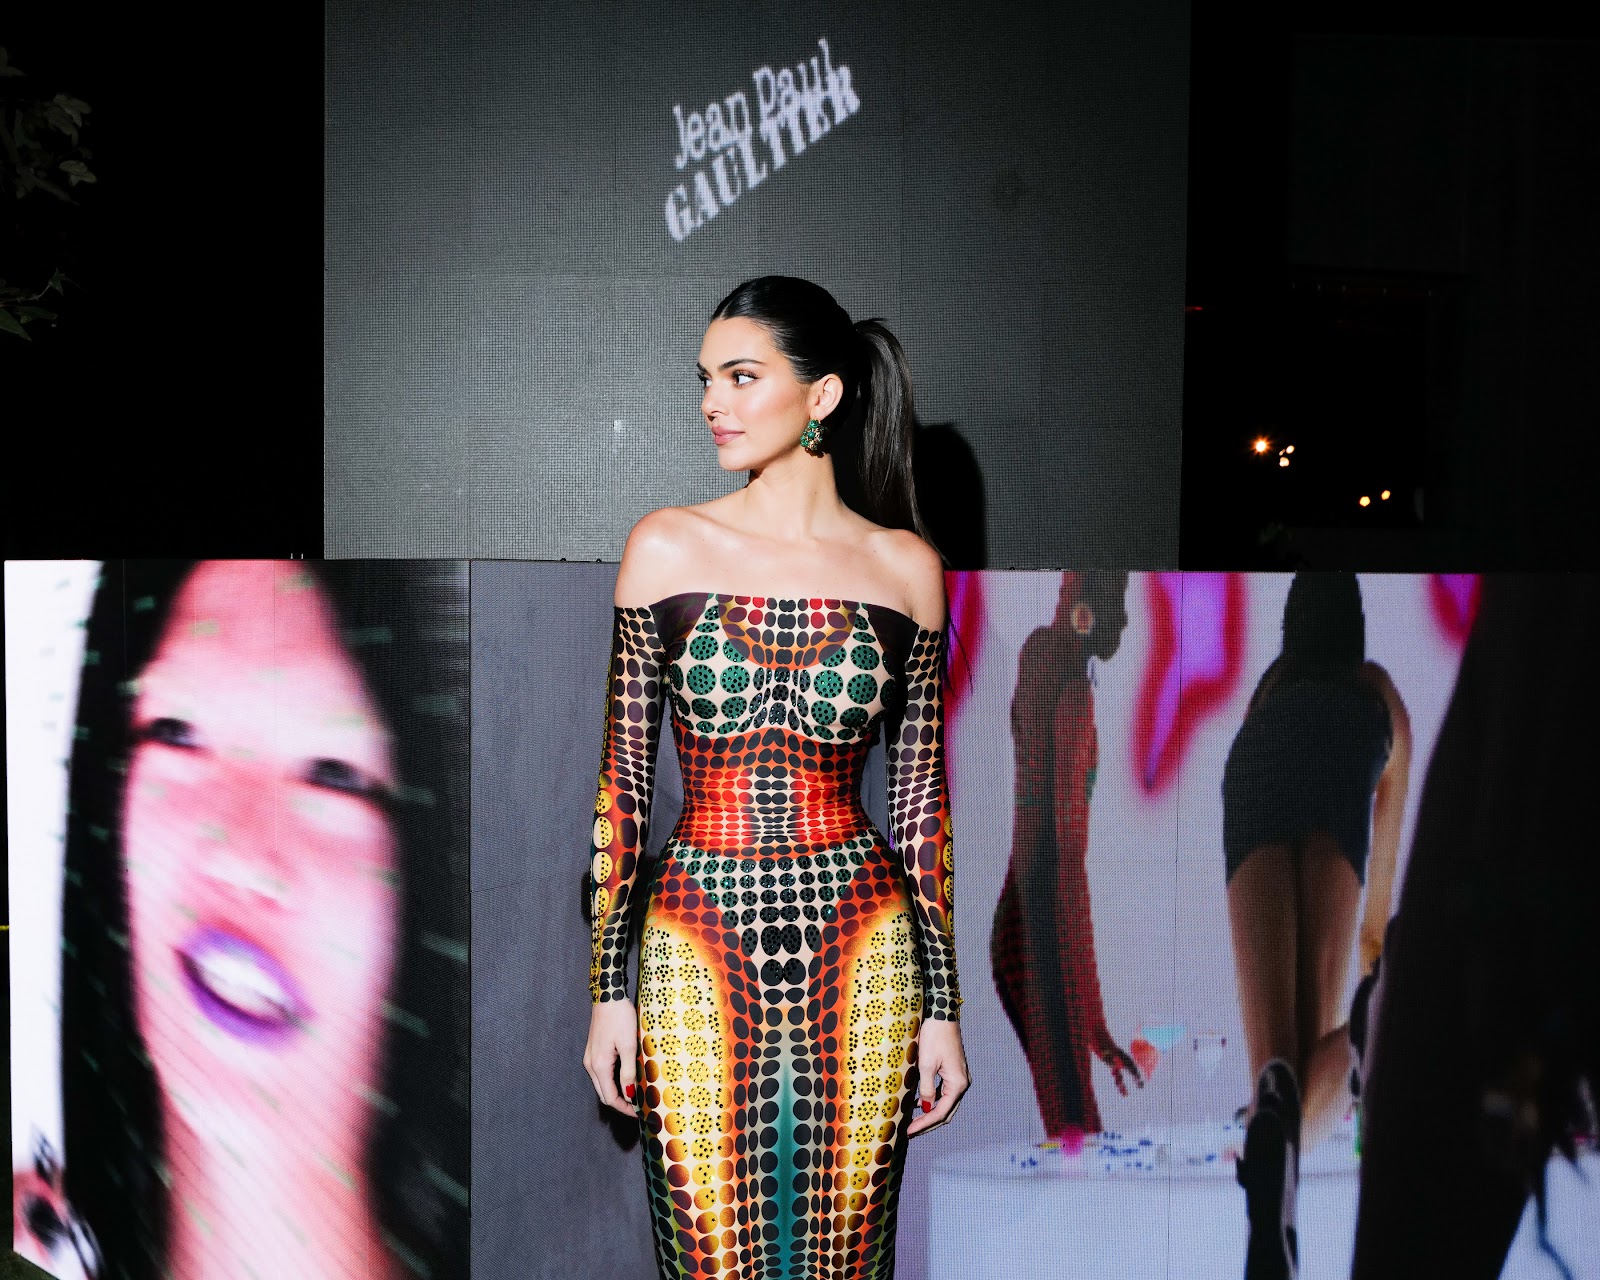 Kendall Jenner Celebrates The Launch Of Jean Paul Gaultier On Fwrd In Los Angeles, California